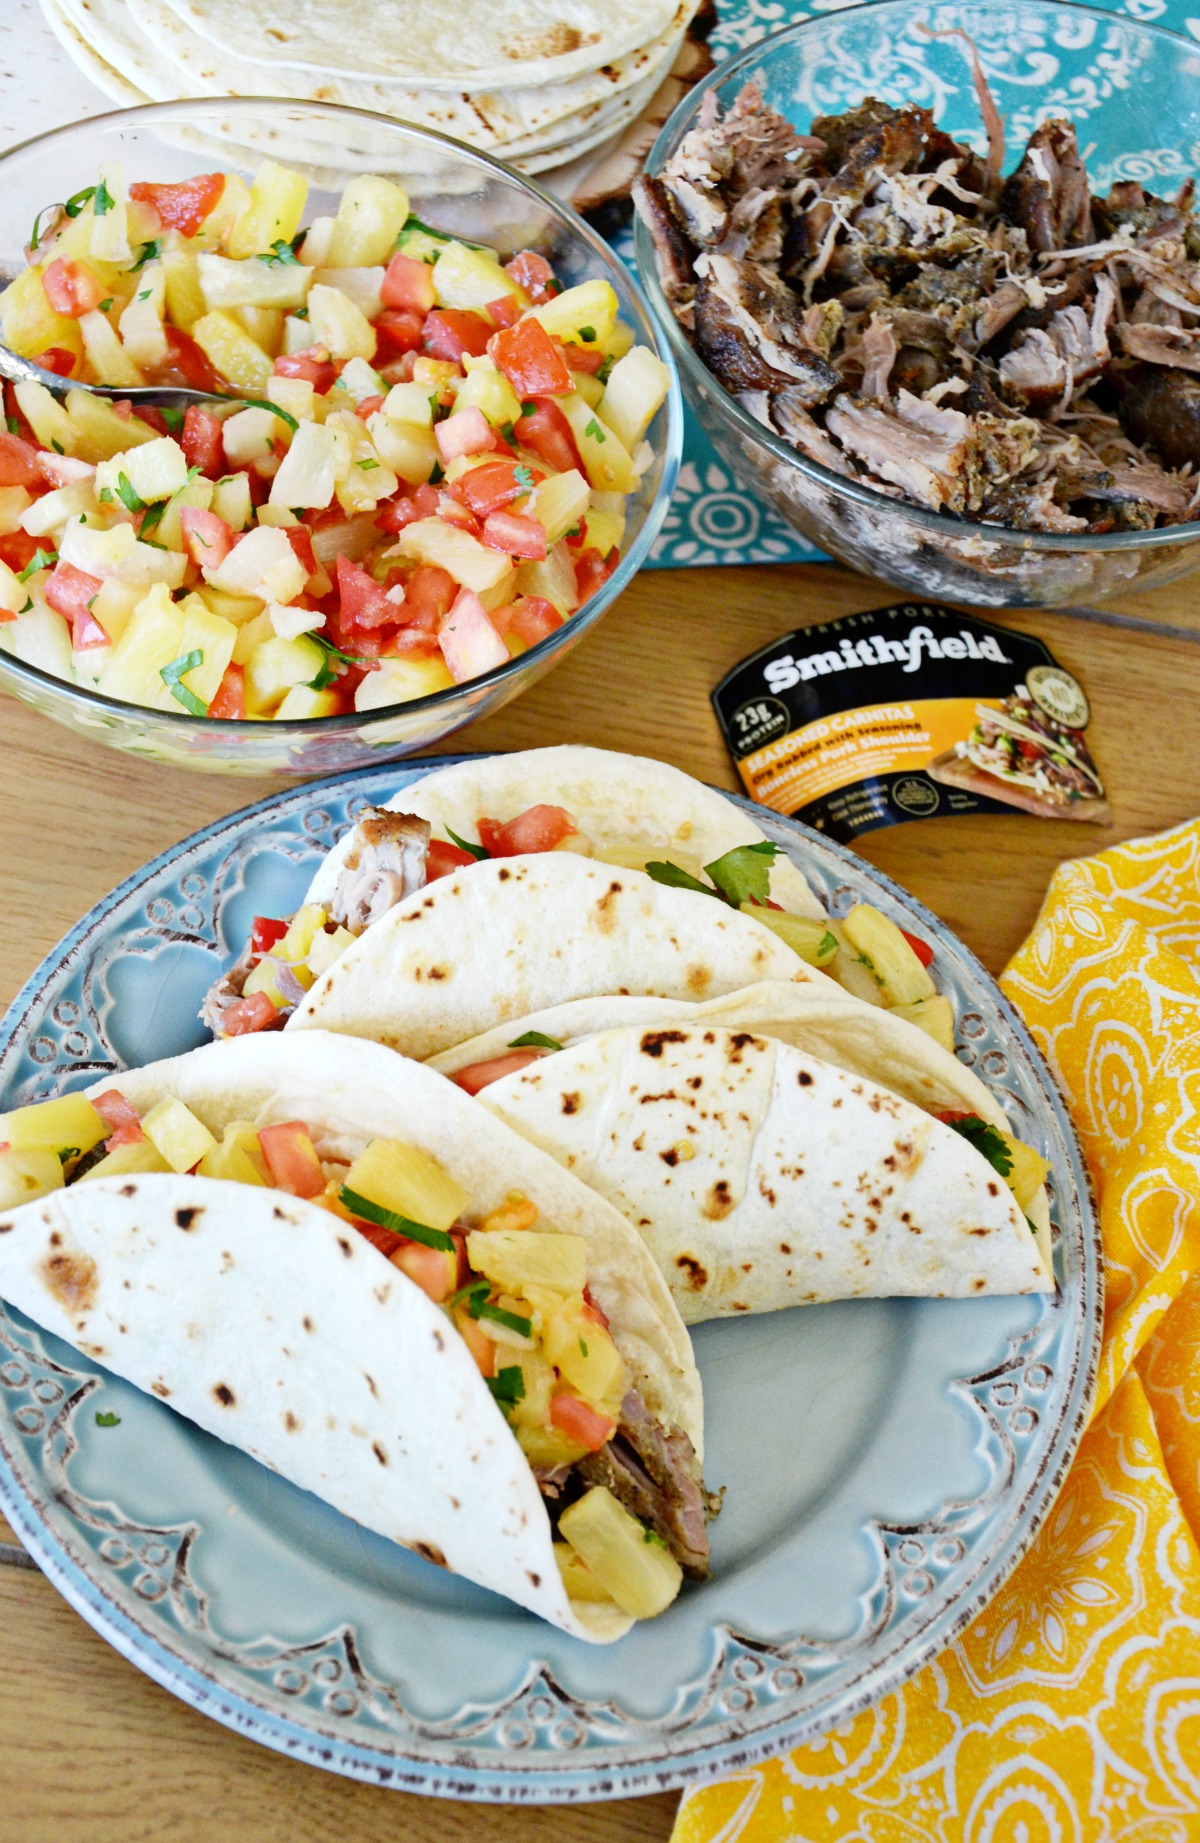 We made pulled pork on a gas grill for these yummy pork tacos with pineapple salsa.